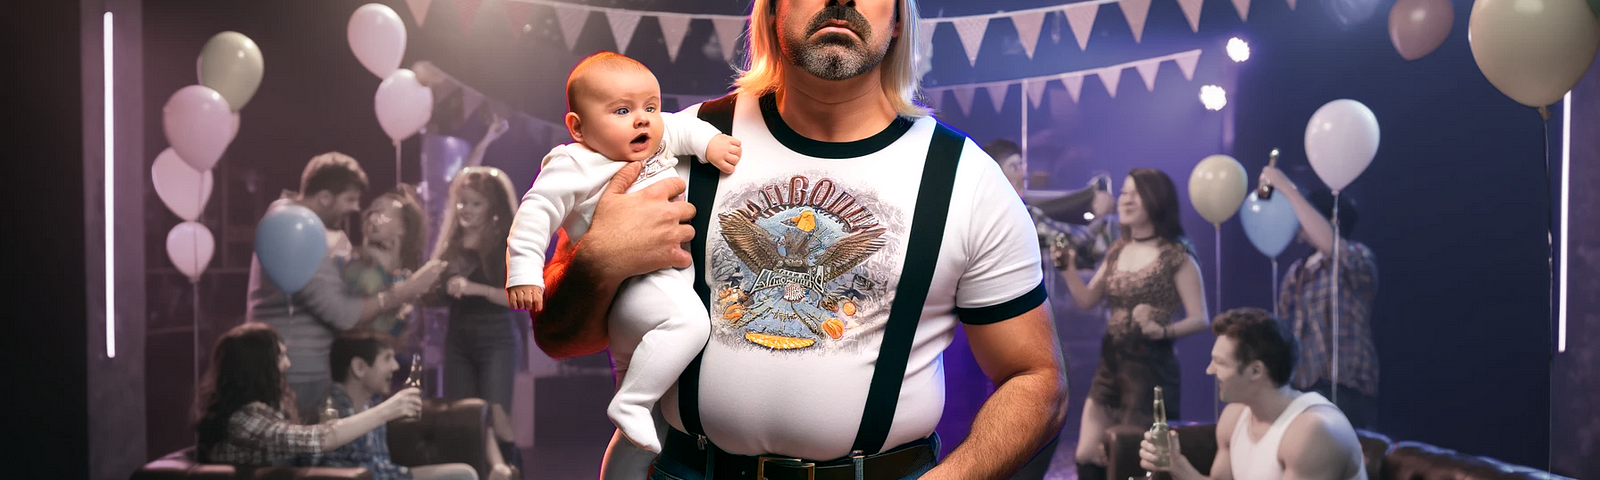 Middle-aged man with a baby at a party.